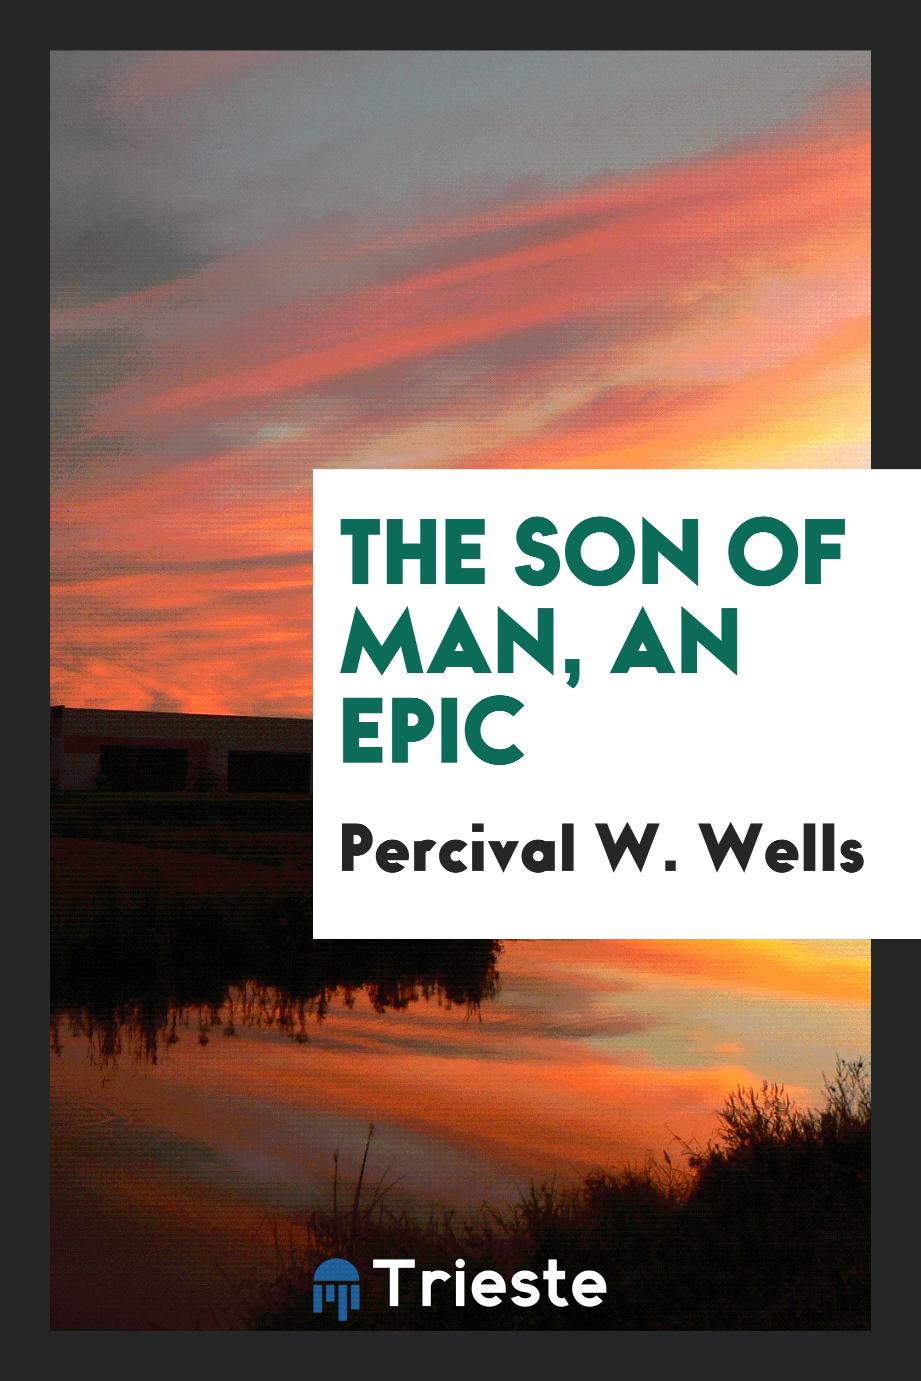 The Son of man, an epic